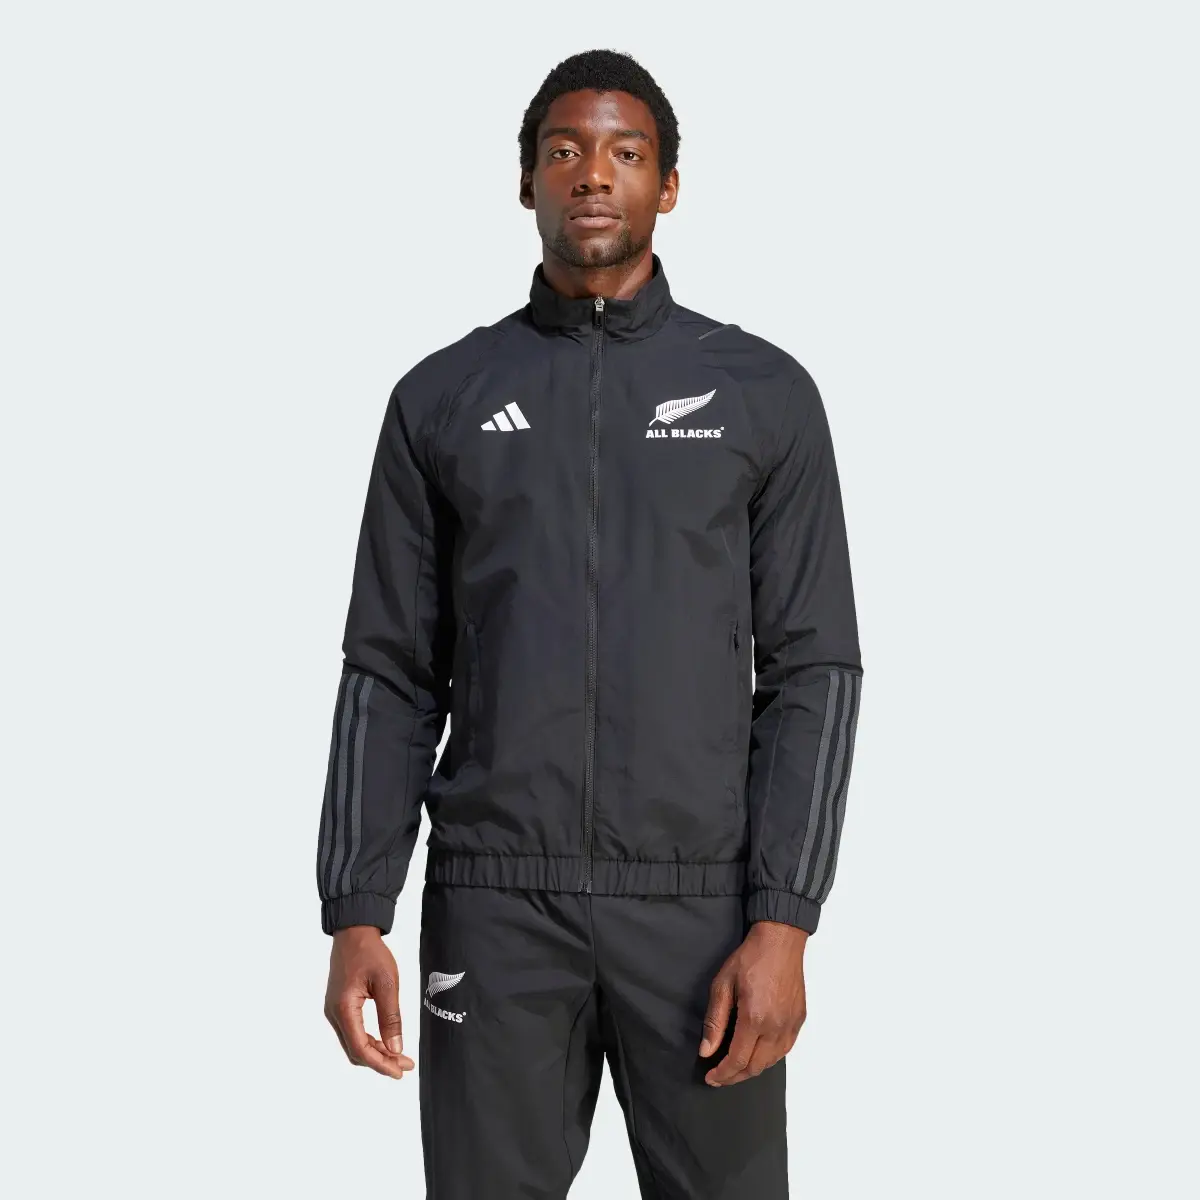 Adidas All Blacks Rugby Track Suit Track Top. 2